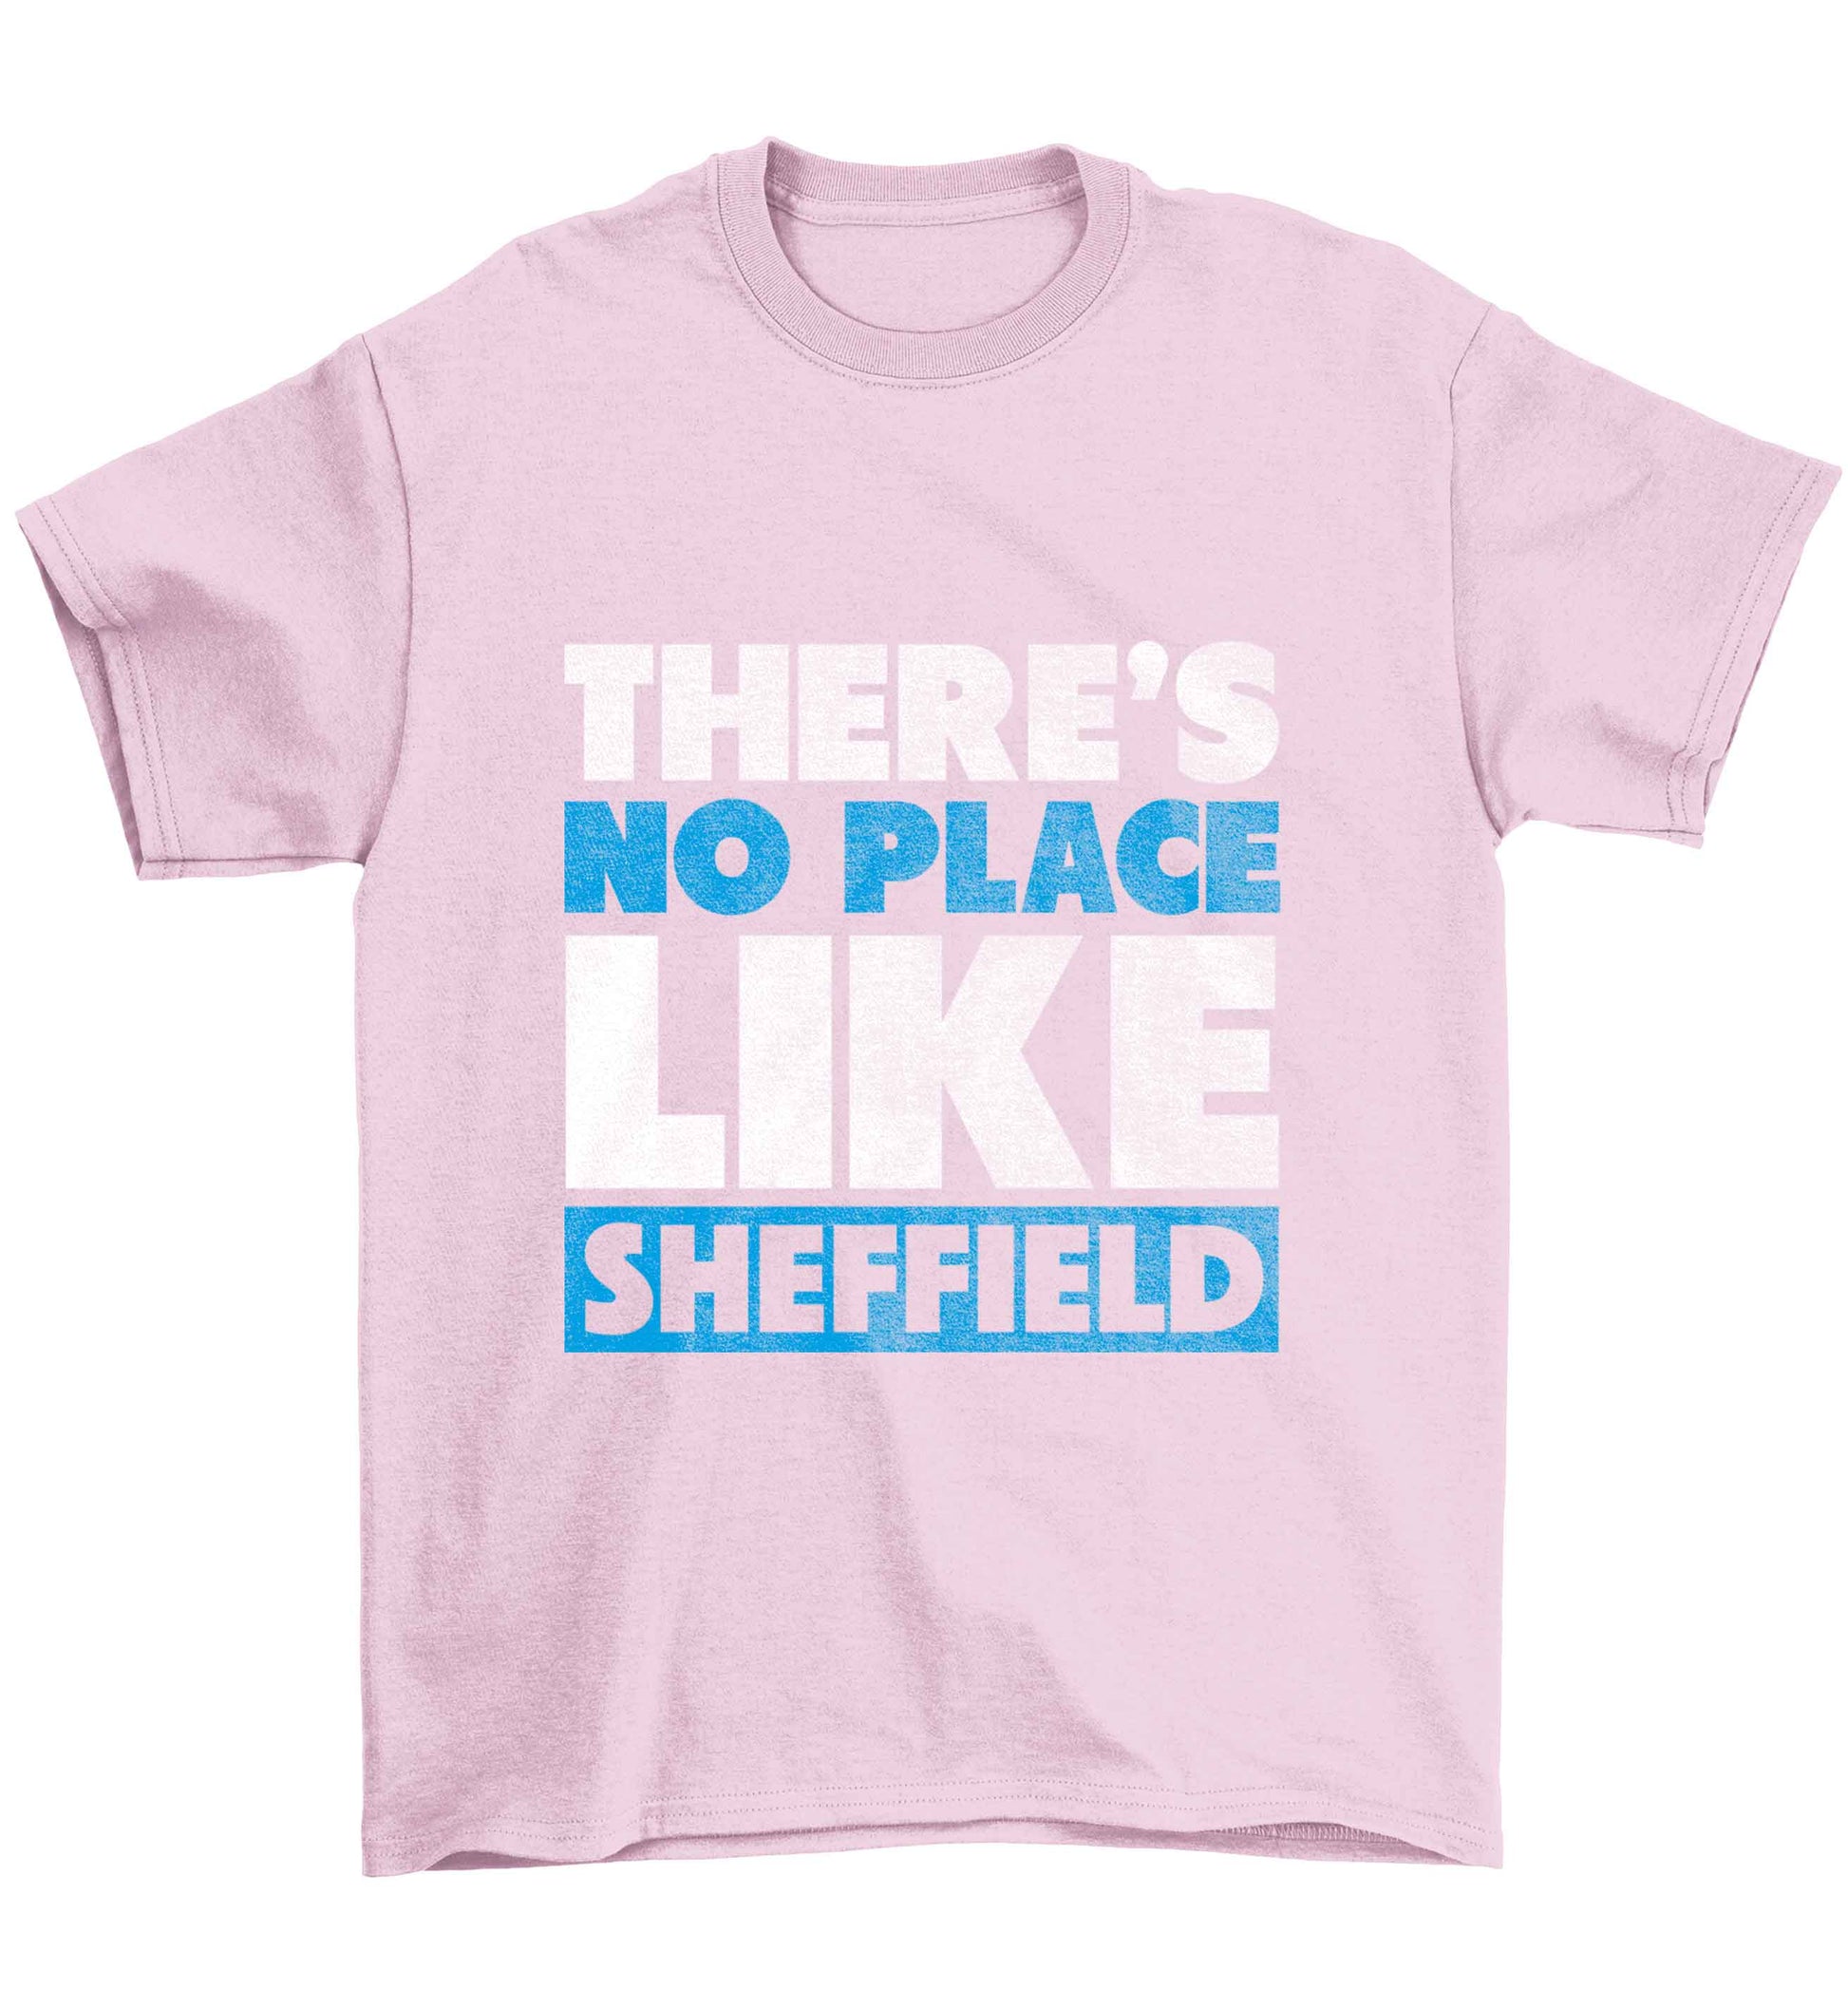 There's no place like Sheffield Children's light pink Tshirt 12-13 Years